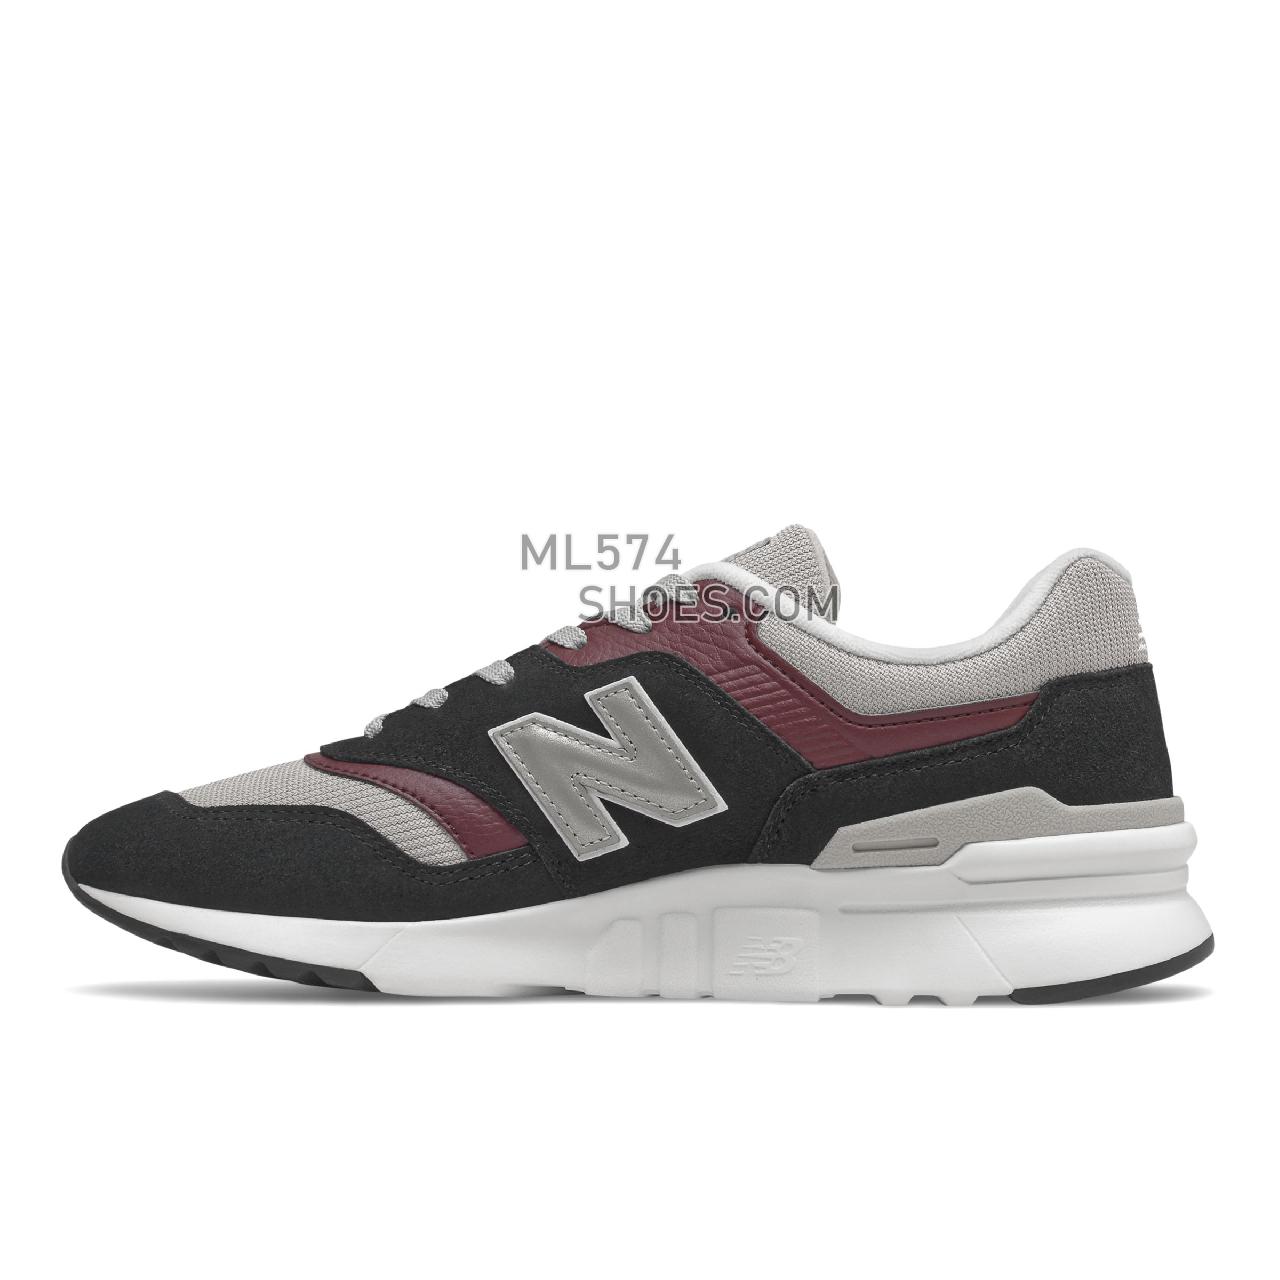 New Balance 997H - Men's Sport Style Sneakers - Black with White - CM997HTC